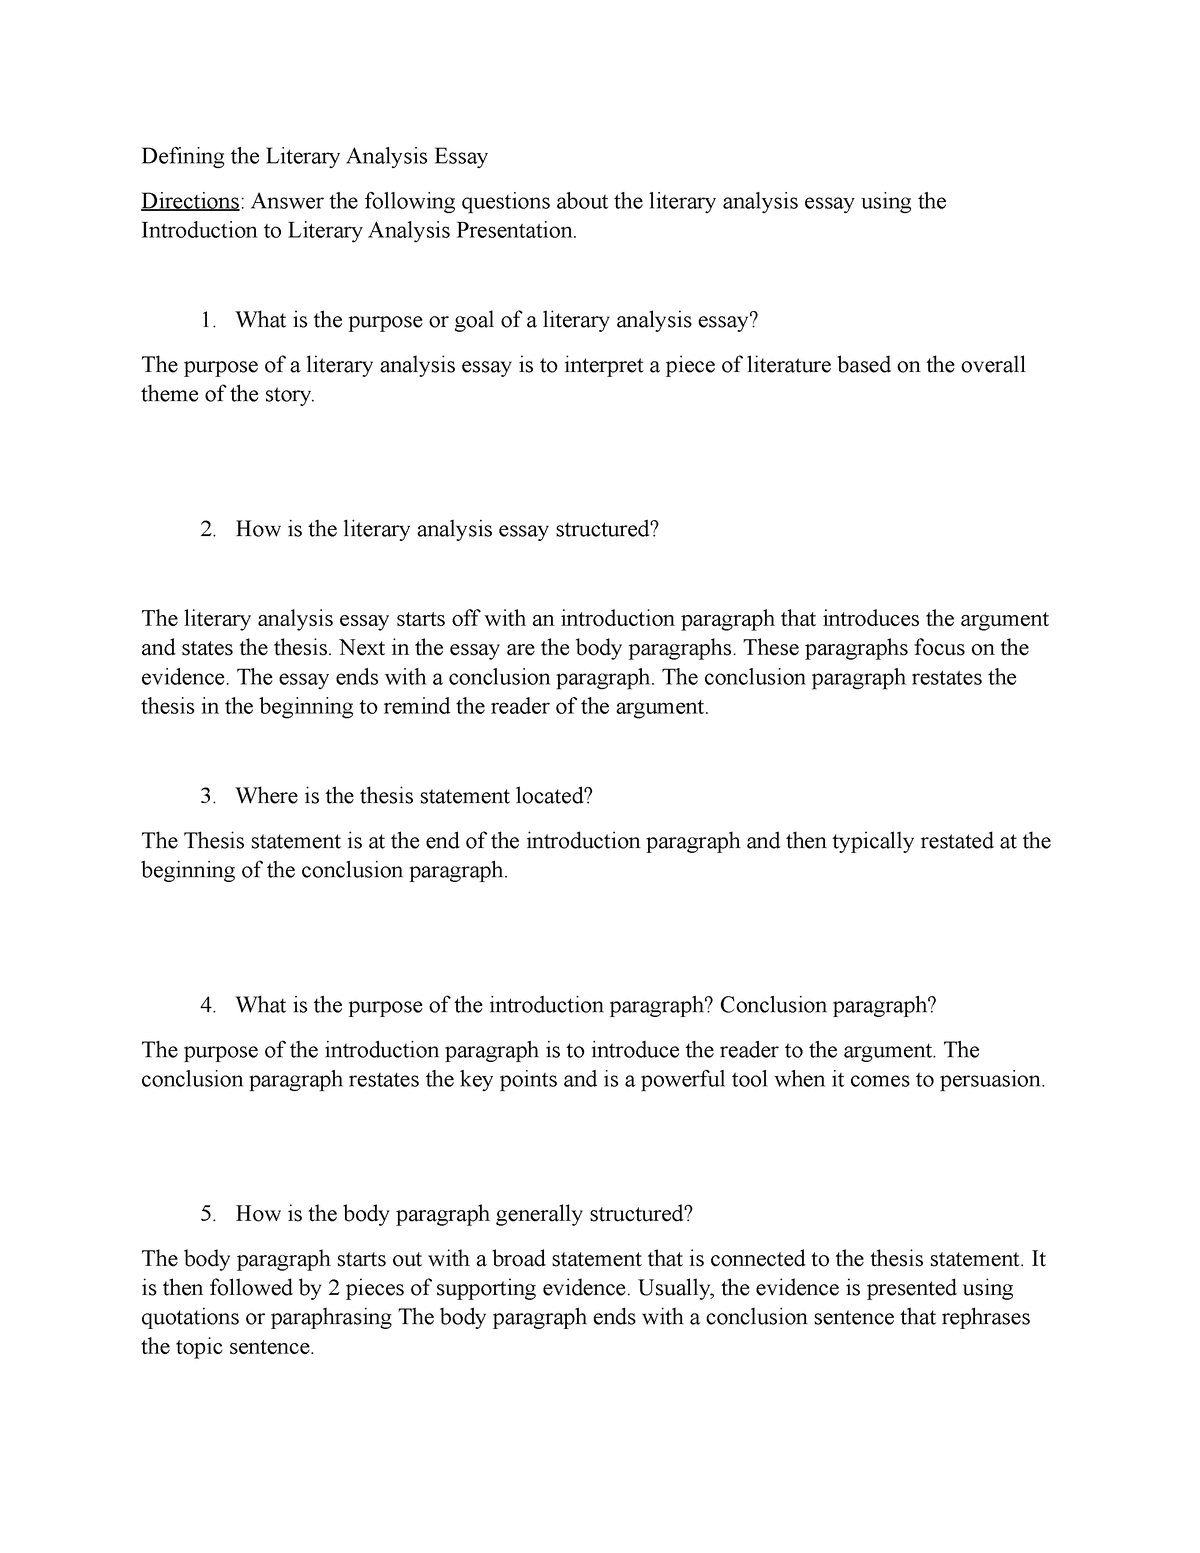 research questions for literary analysis